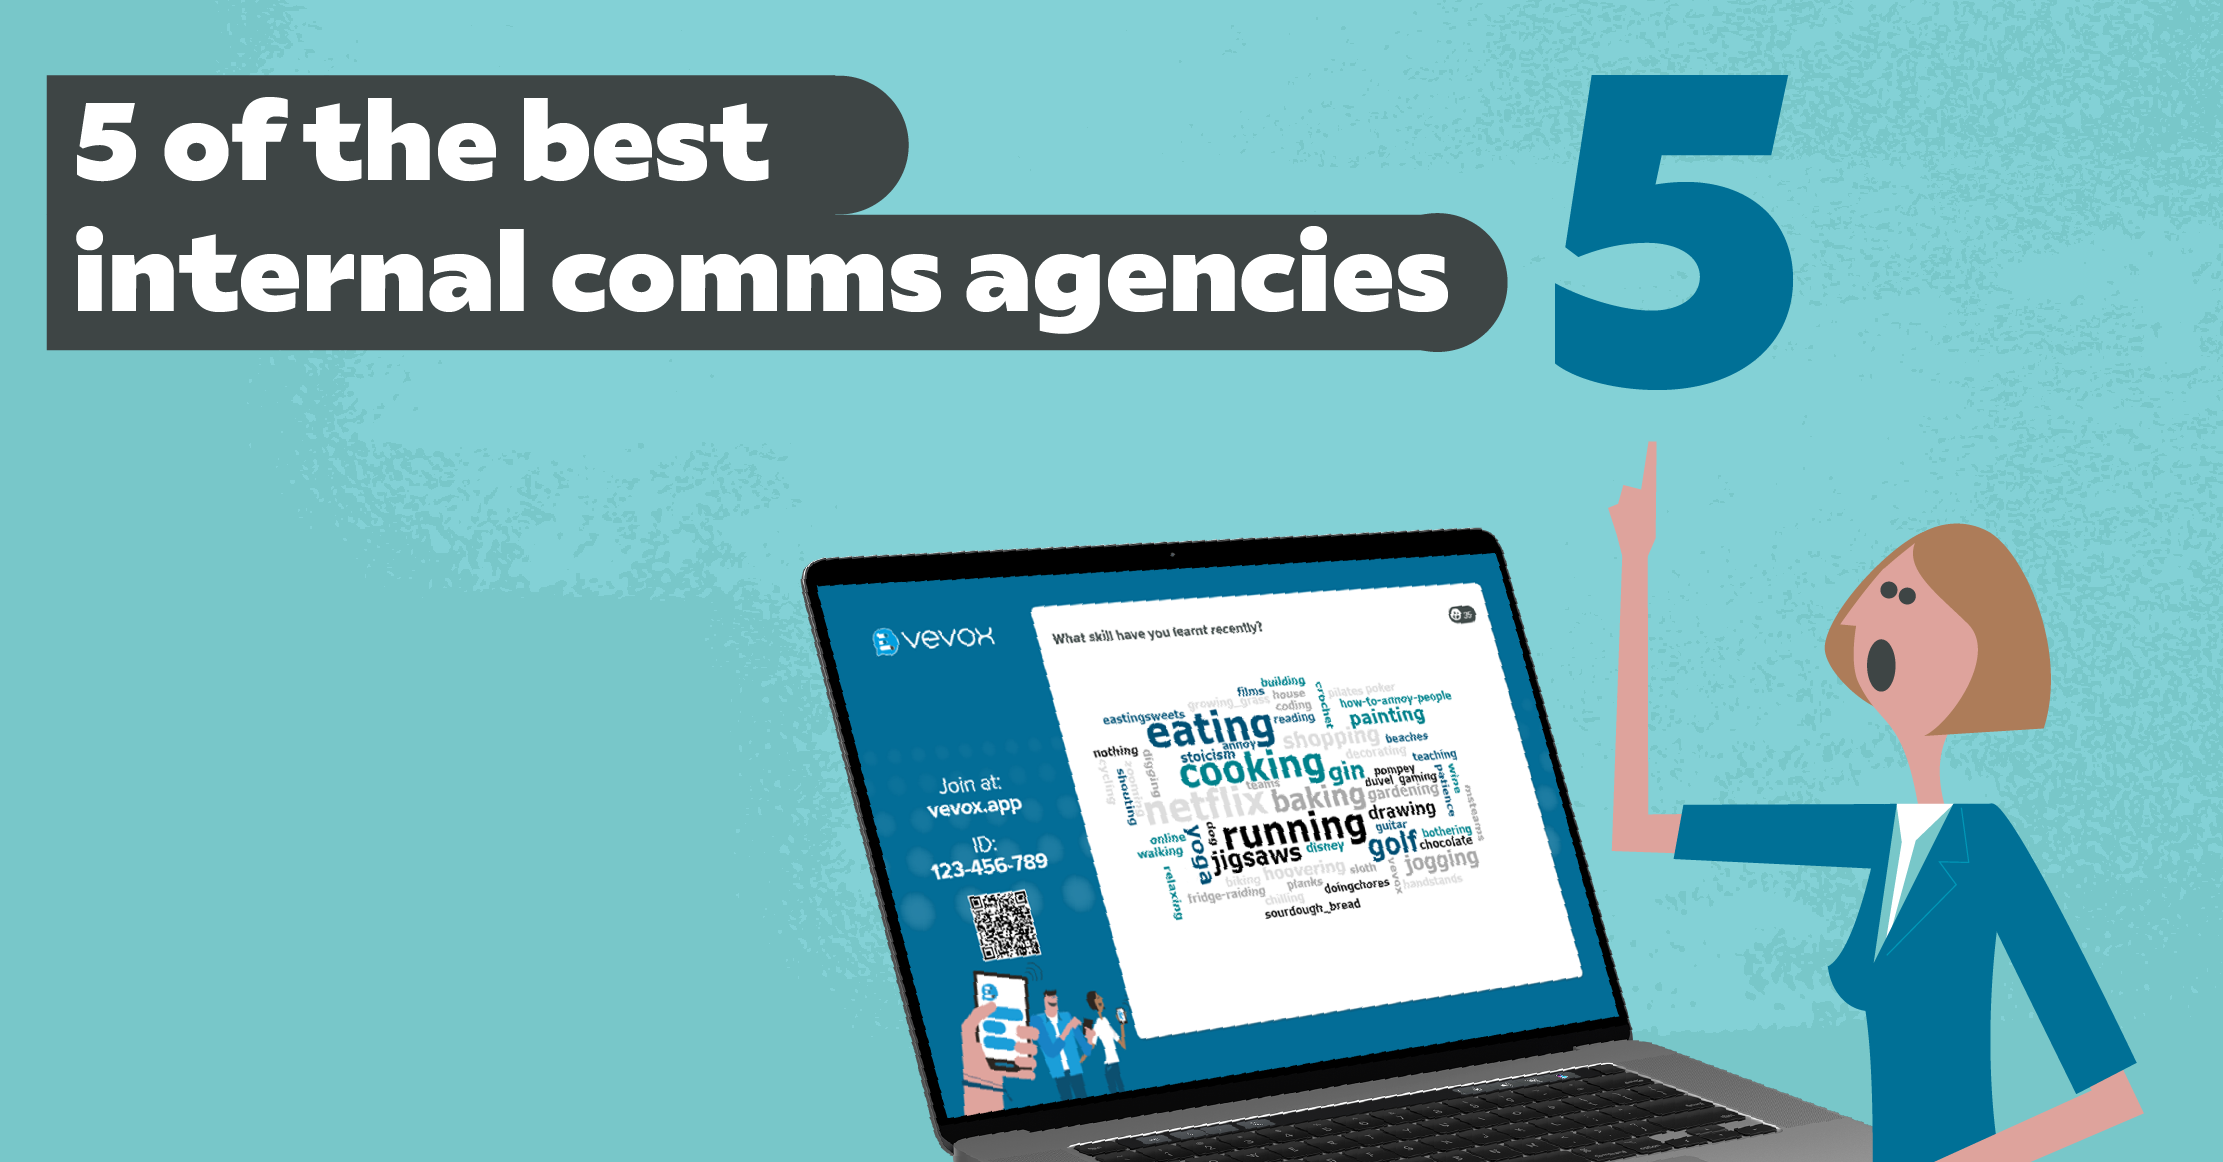 5 of the best internal communications agencies